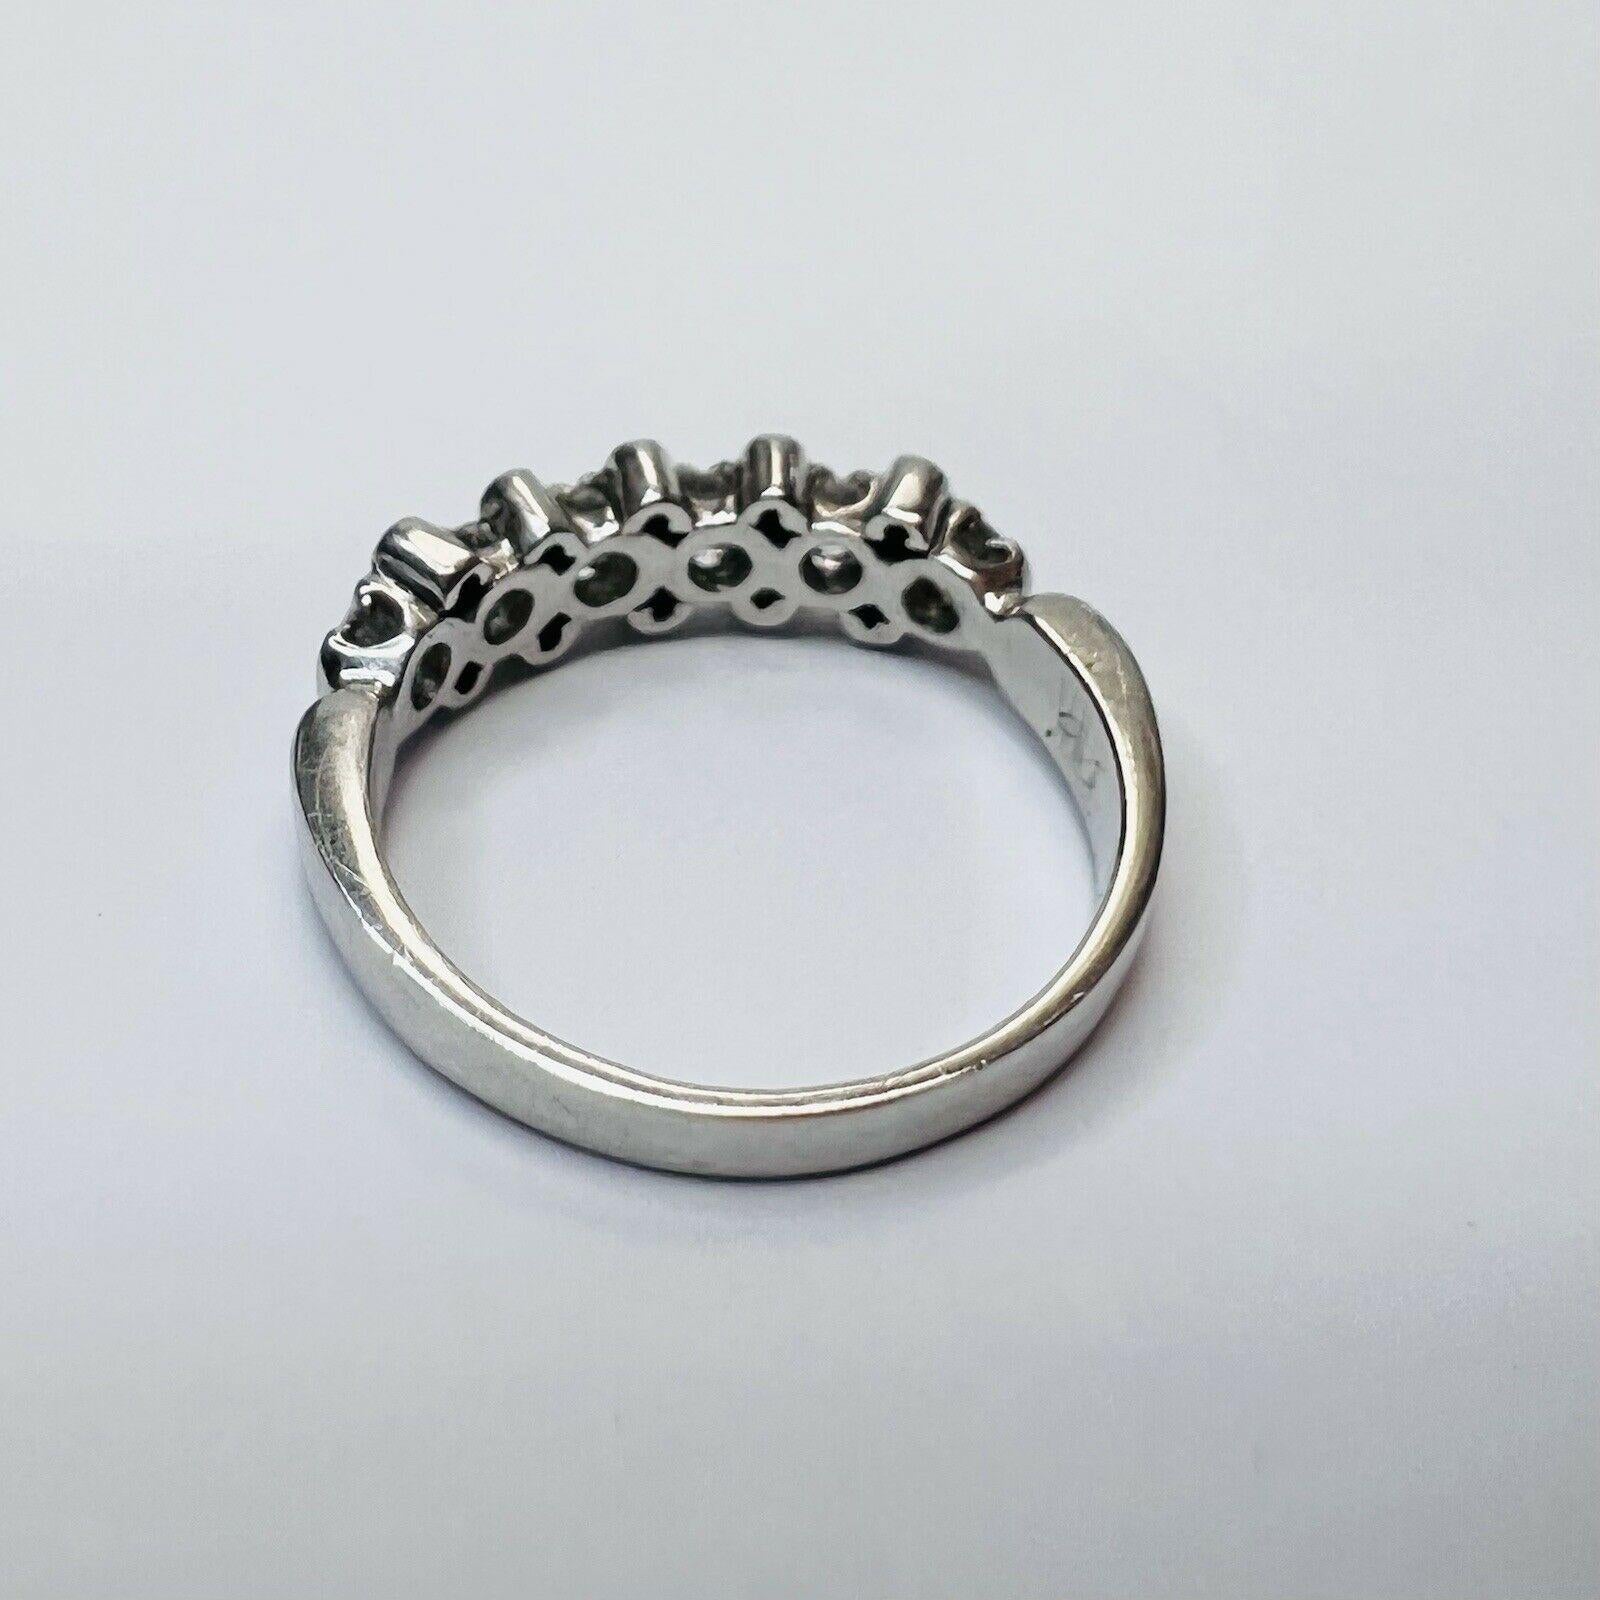 30 pointer eternity band